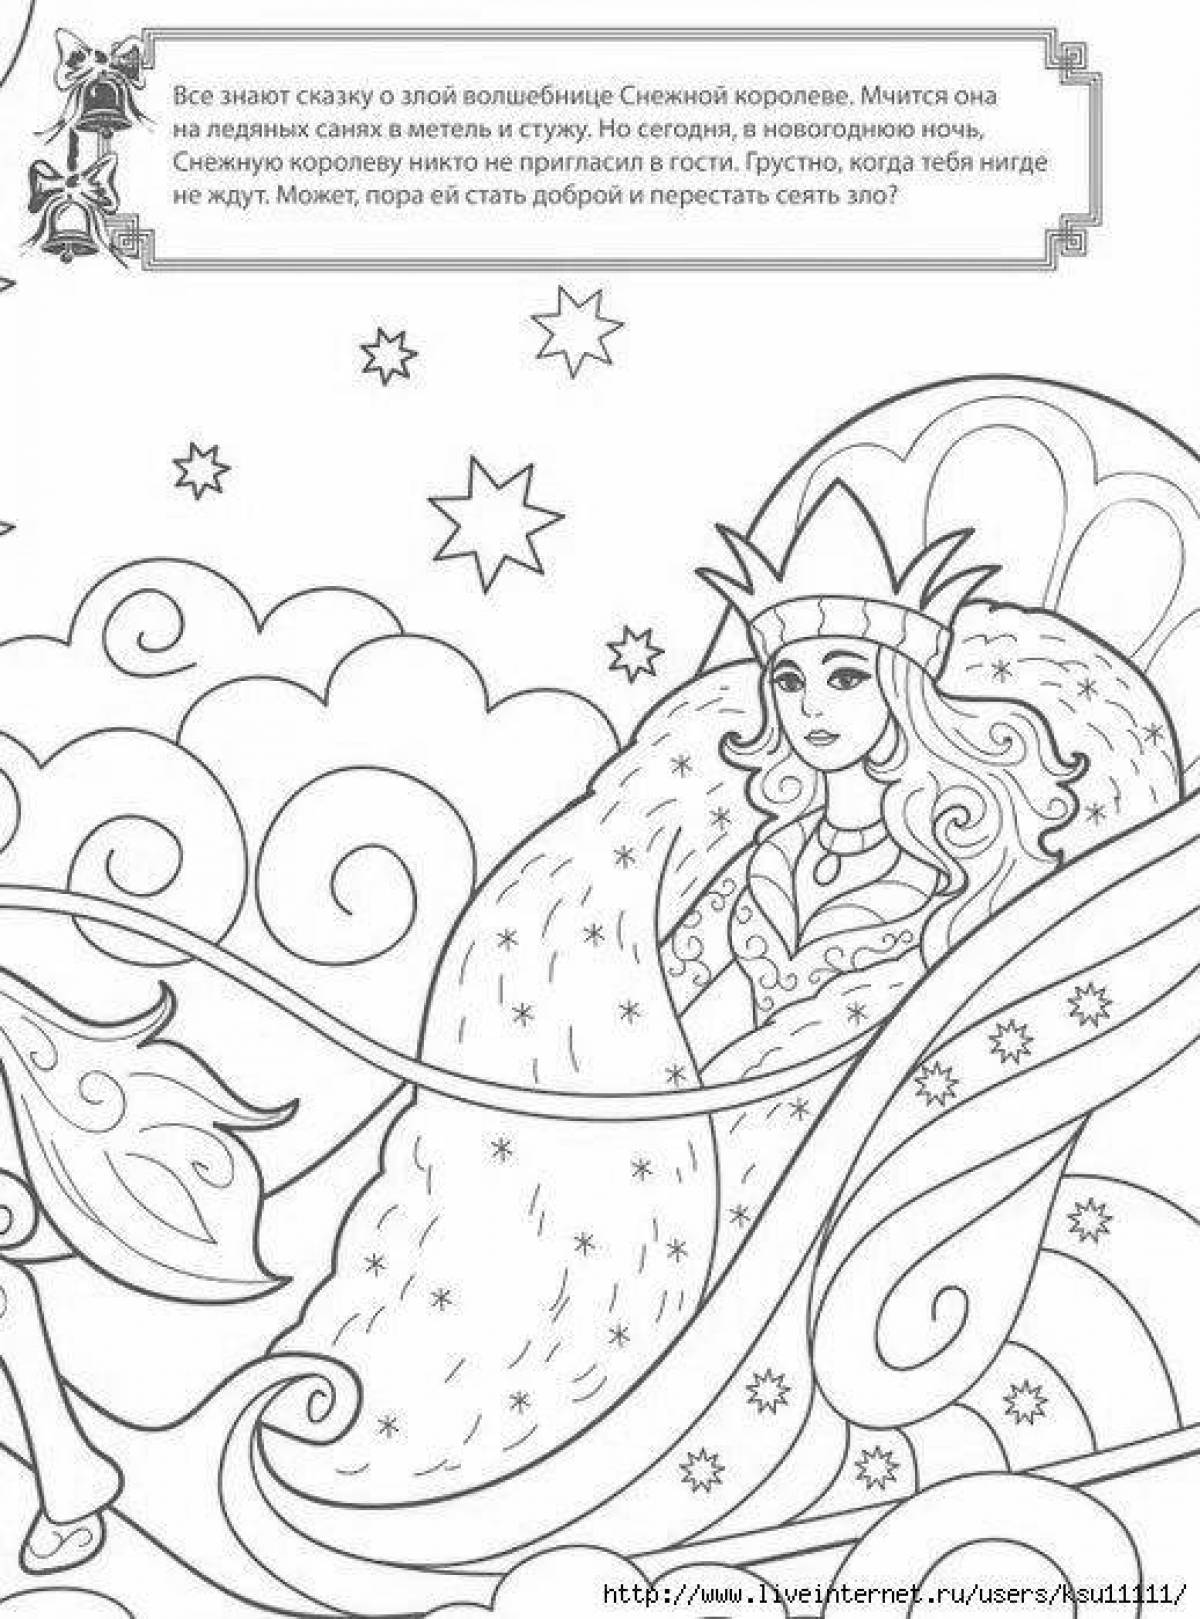 Awesome blizzard coloring book